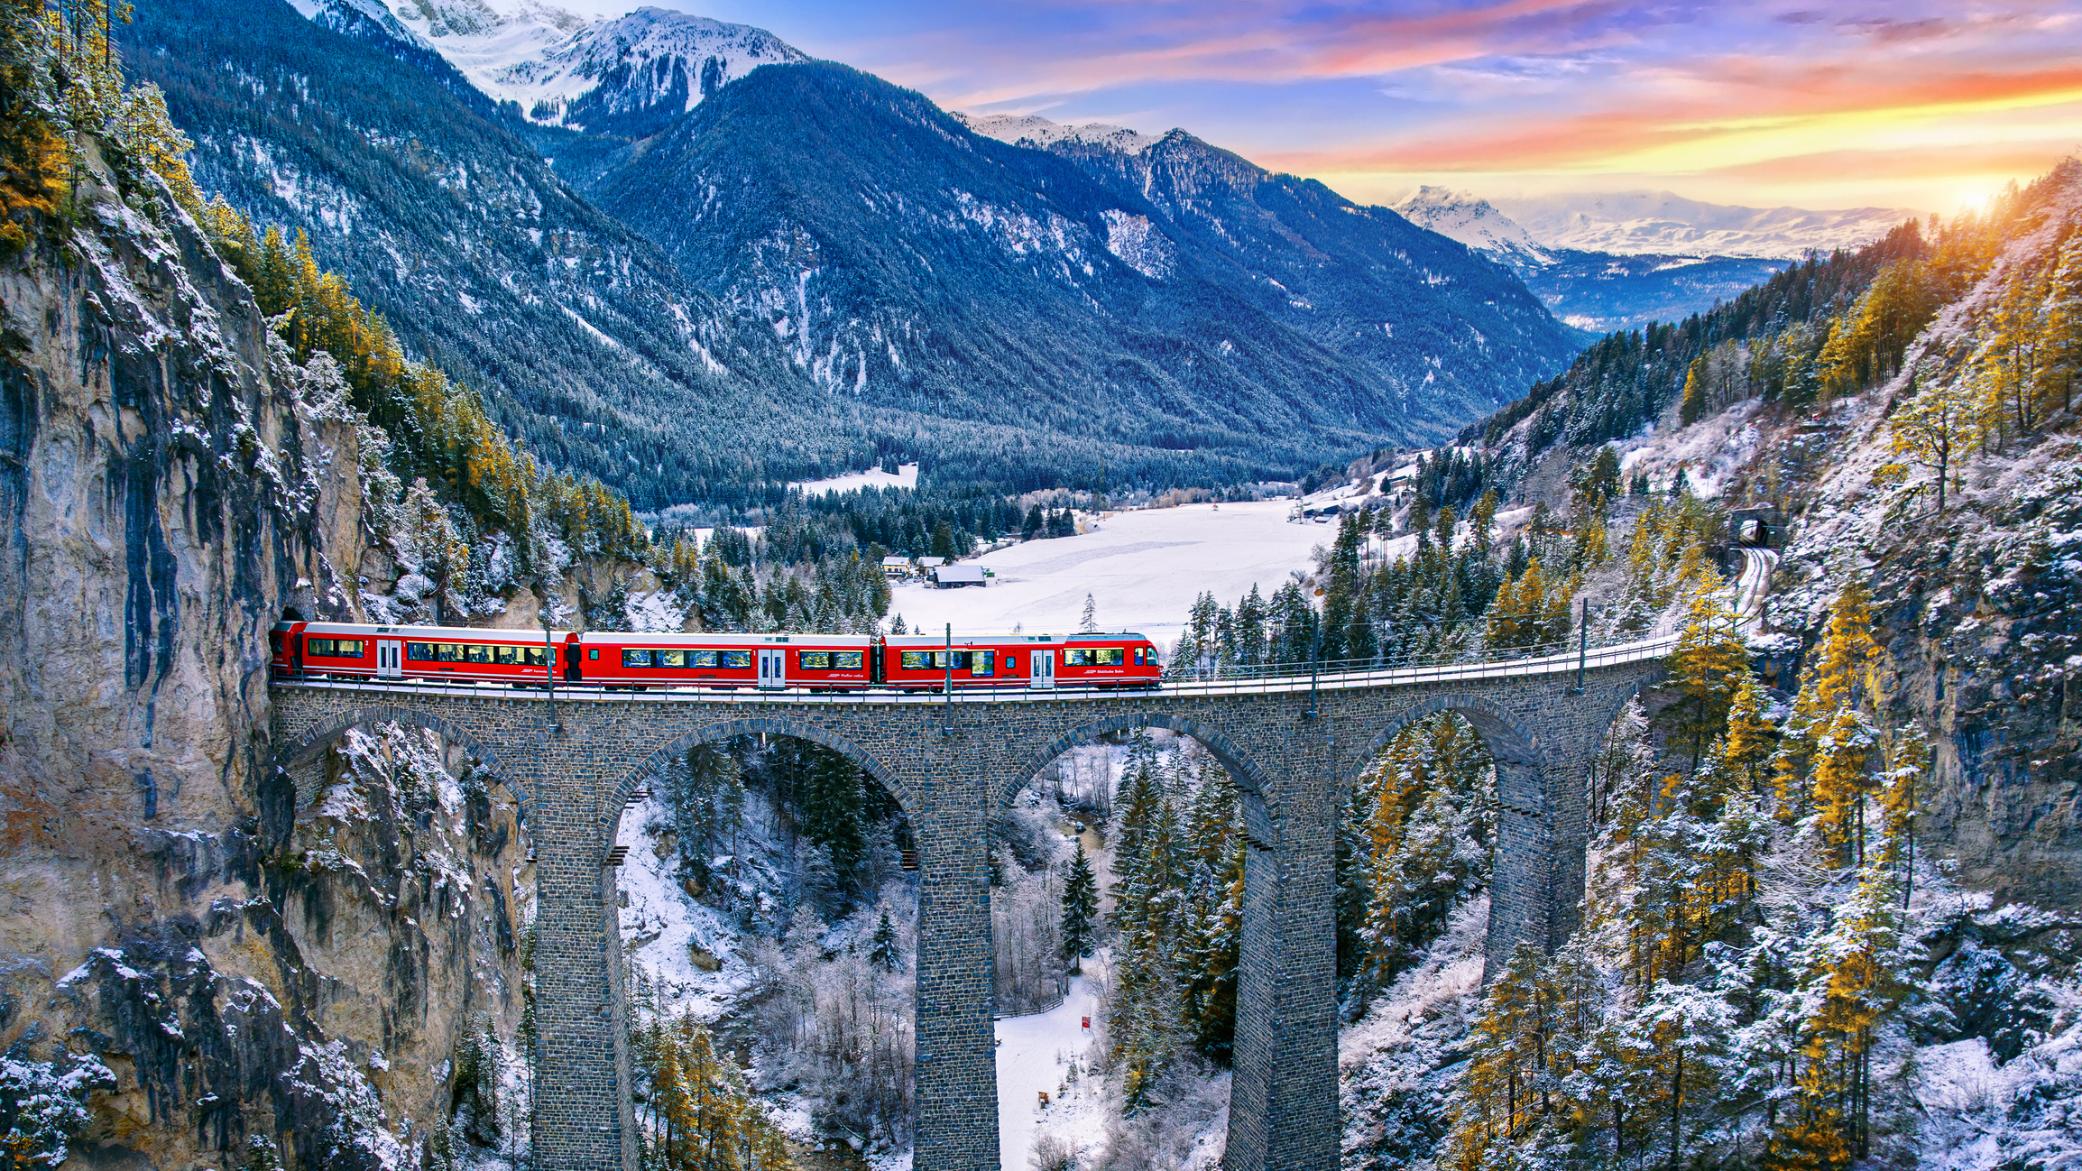 A train crossing the Landwasser Viaduct in the Swiss Alps. Photo: Getty.